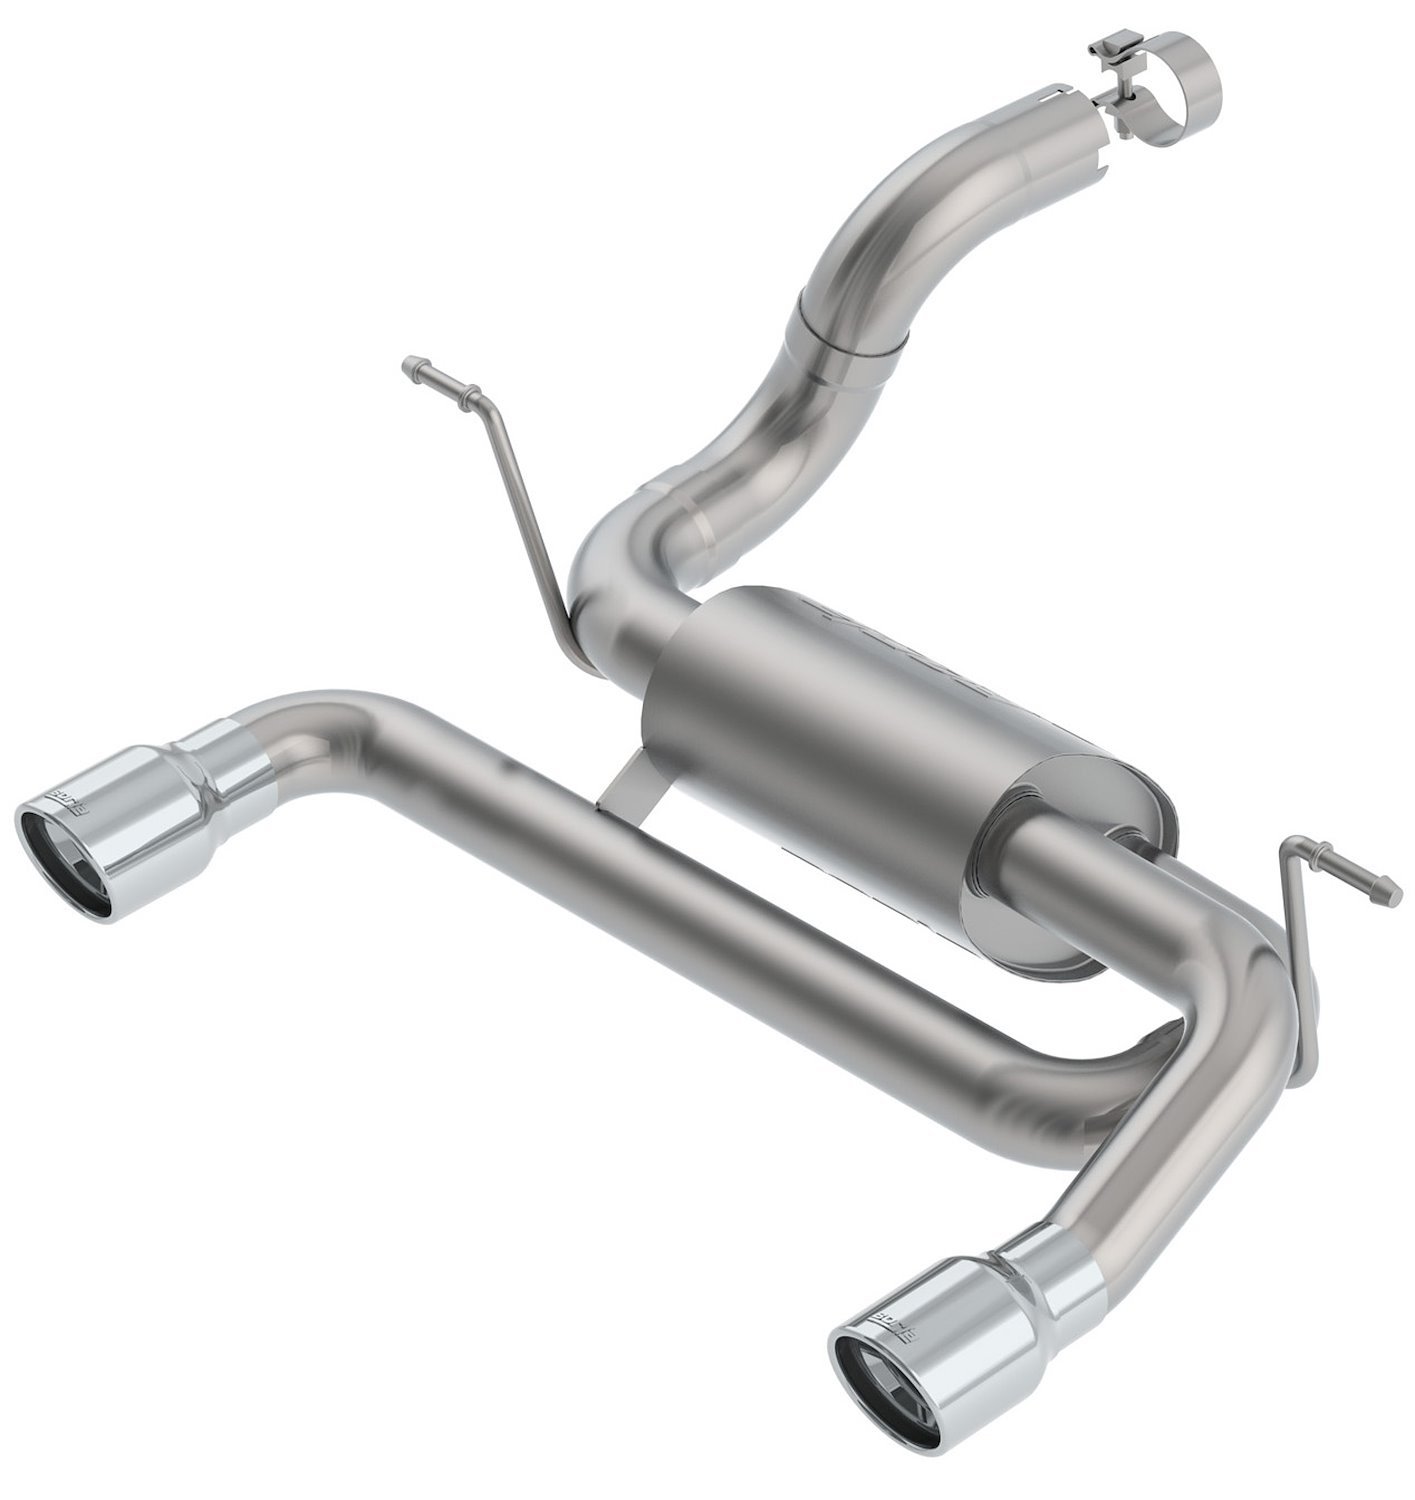 Axle-Back Exhaust System Fits 2018-2019 Jeep Wrangler JL/ JLU 2.0L - "S-Type" Muffler - Polished Tips